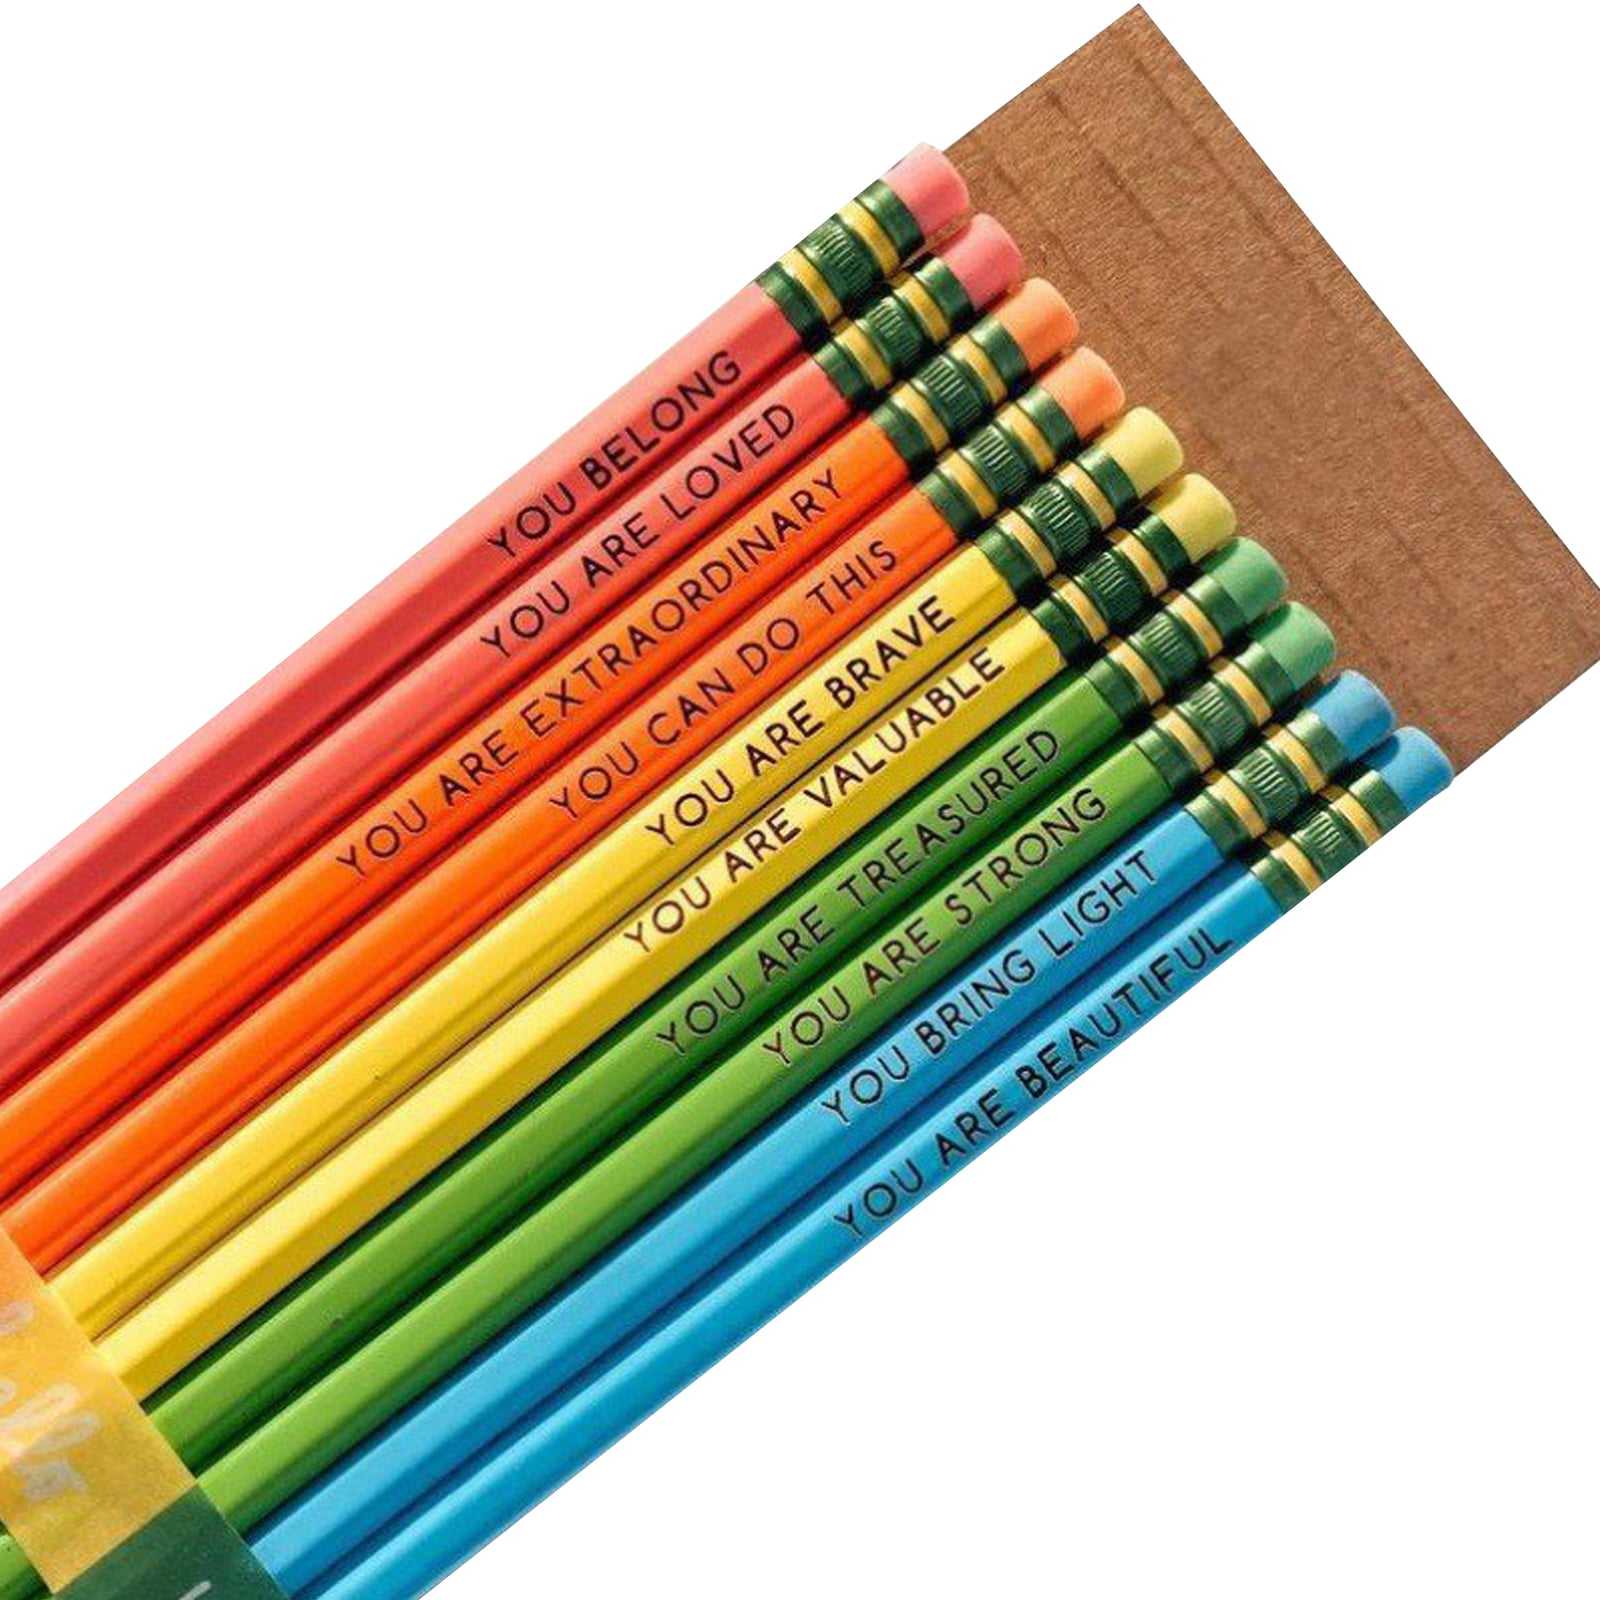 Bright Color,Compliment Style Cute Bible Pencils Colorful Inspirational Pencil with Sayings Pre Sharpened Blessing Pencil with Eraser for women Girls Kids 20 Pcs Motivational Compliment Pencils Set 